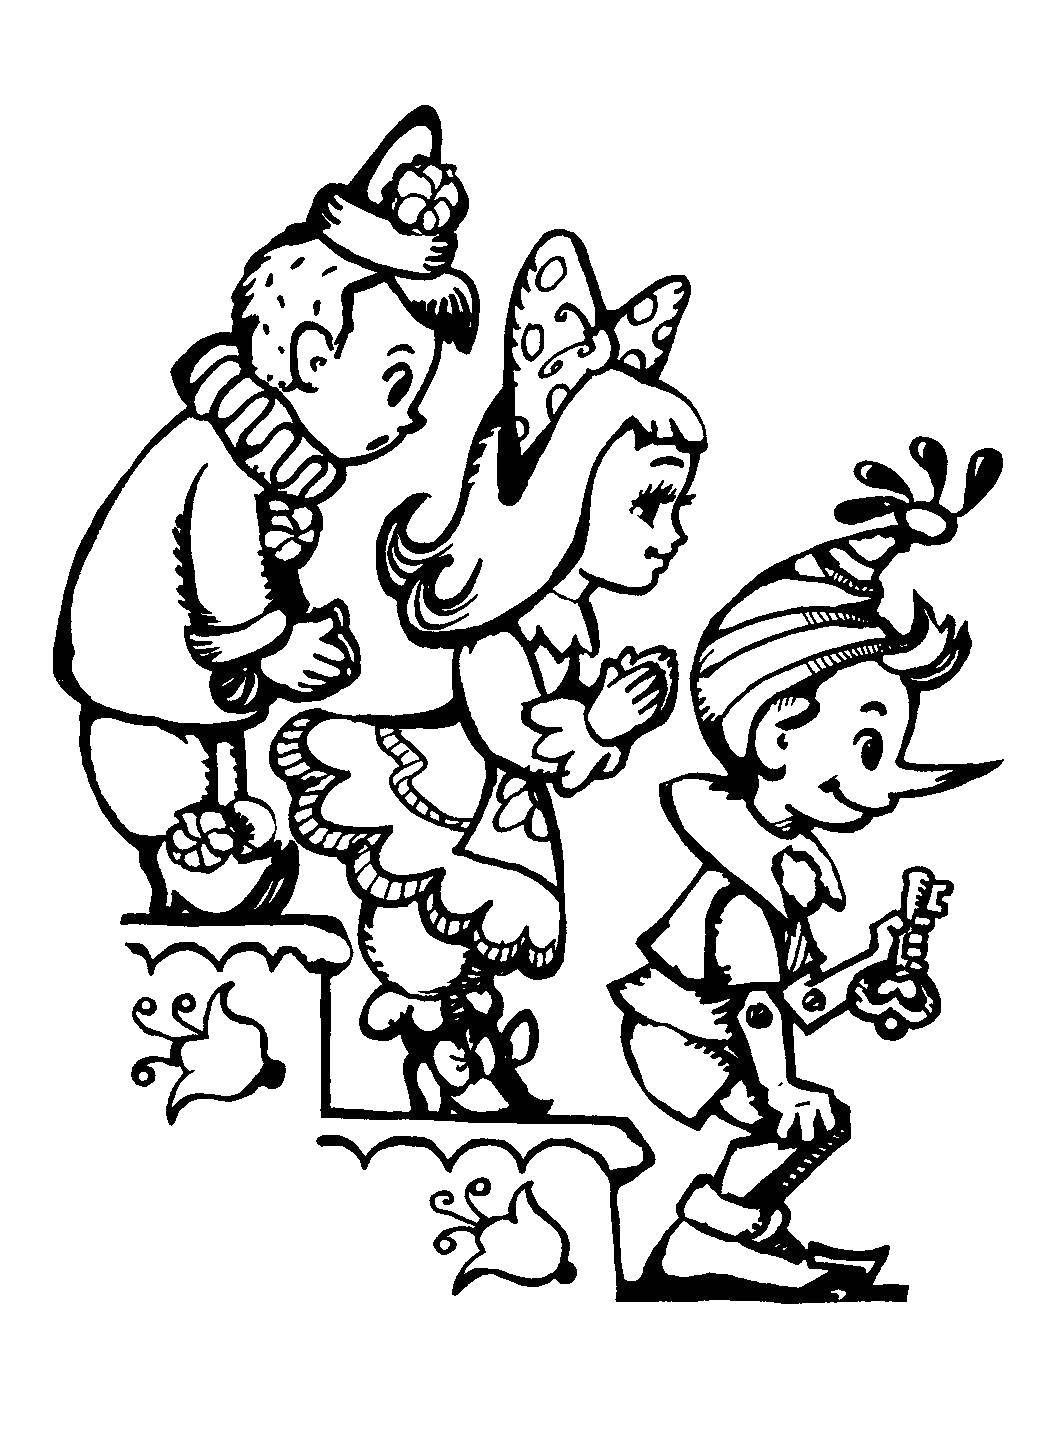 Coloring Pierrot, Malvina and Pinocchio. Category Golden key. Tags:  Pinocchio , Golden Key, cartoon.